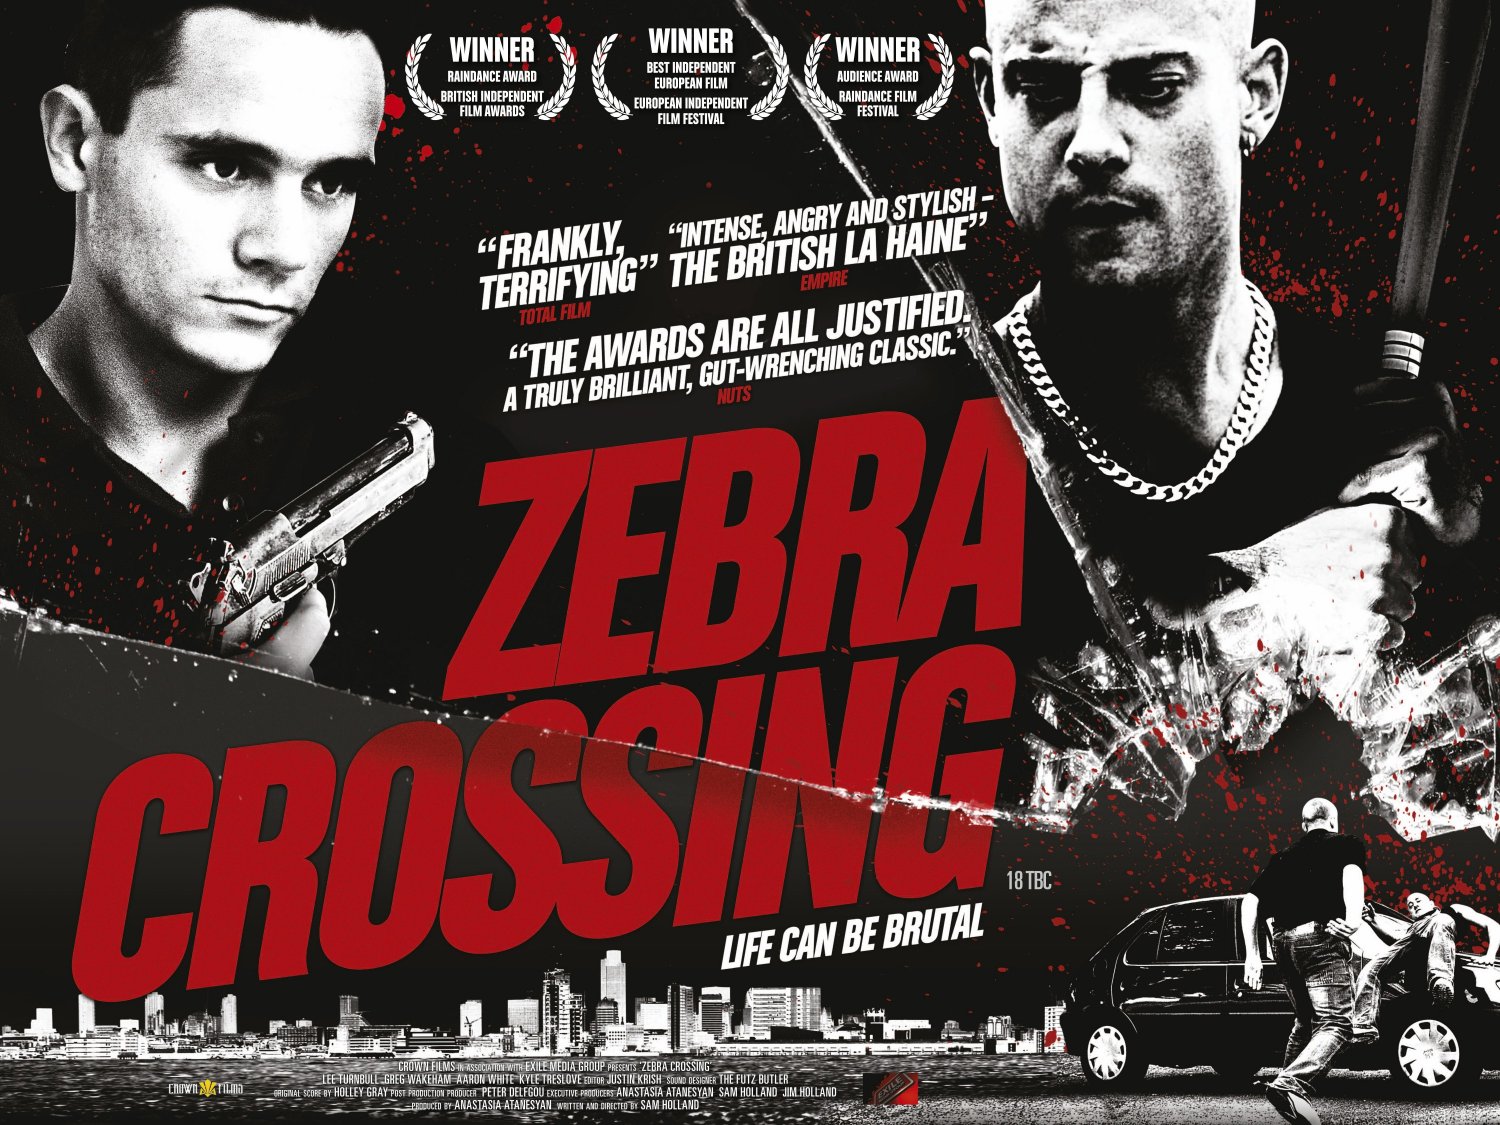 Extra Large Movie Poster Image for Zebra Crossing 